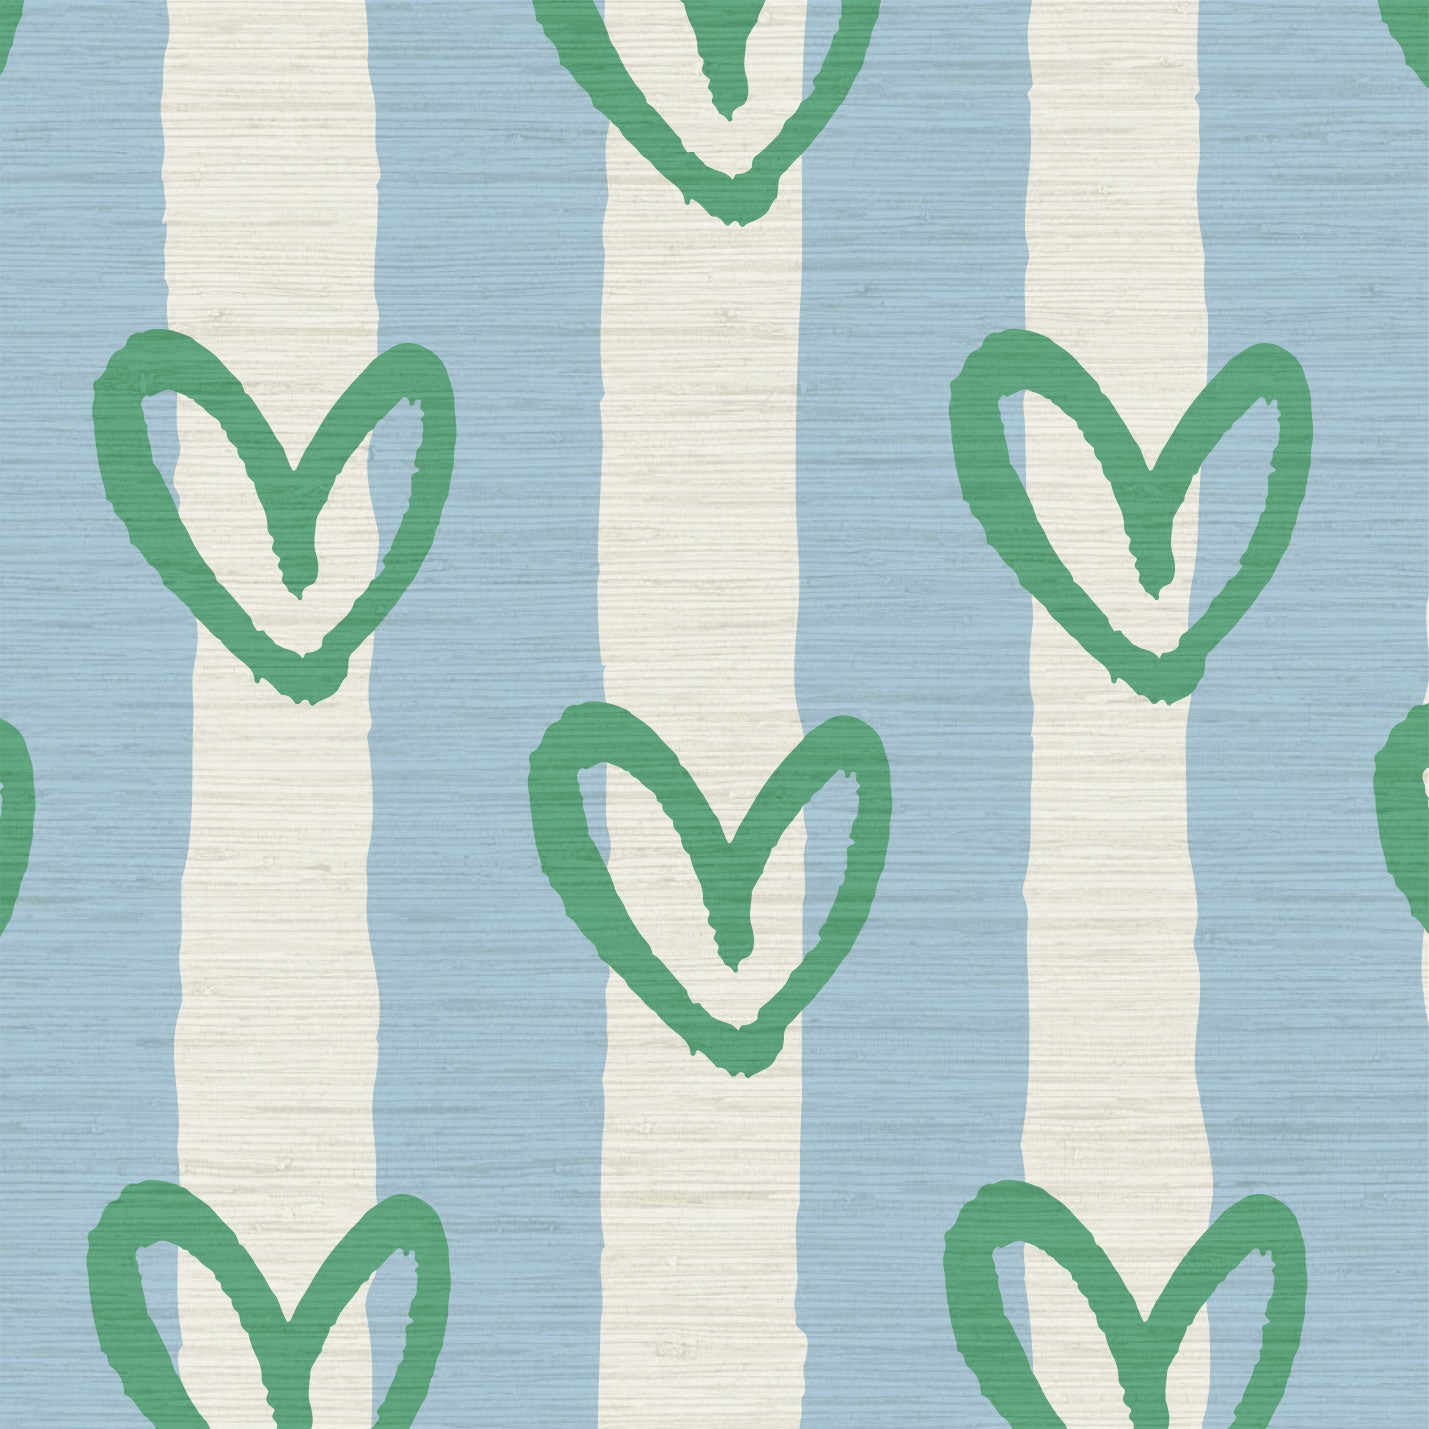 Load image into Gallery viewer, hearts vertical wide stripes house of shan collaboration kids playroom nursery Grasscloth wallpaper Natural Textured Eco-Friendly Non-toxic High-quality Sustainable Interior Design Bold Custom Tailor-made Retro chic Bold fun french blue white green living room nursery kids bedroom
